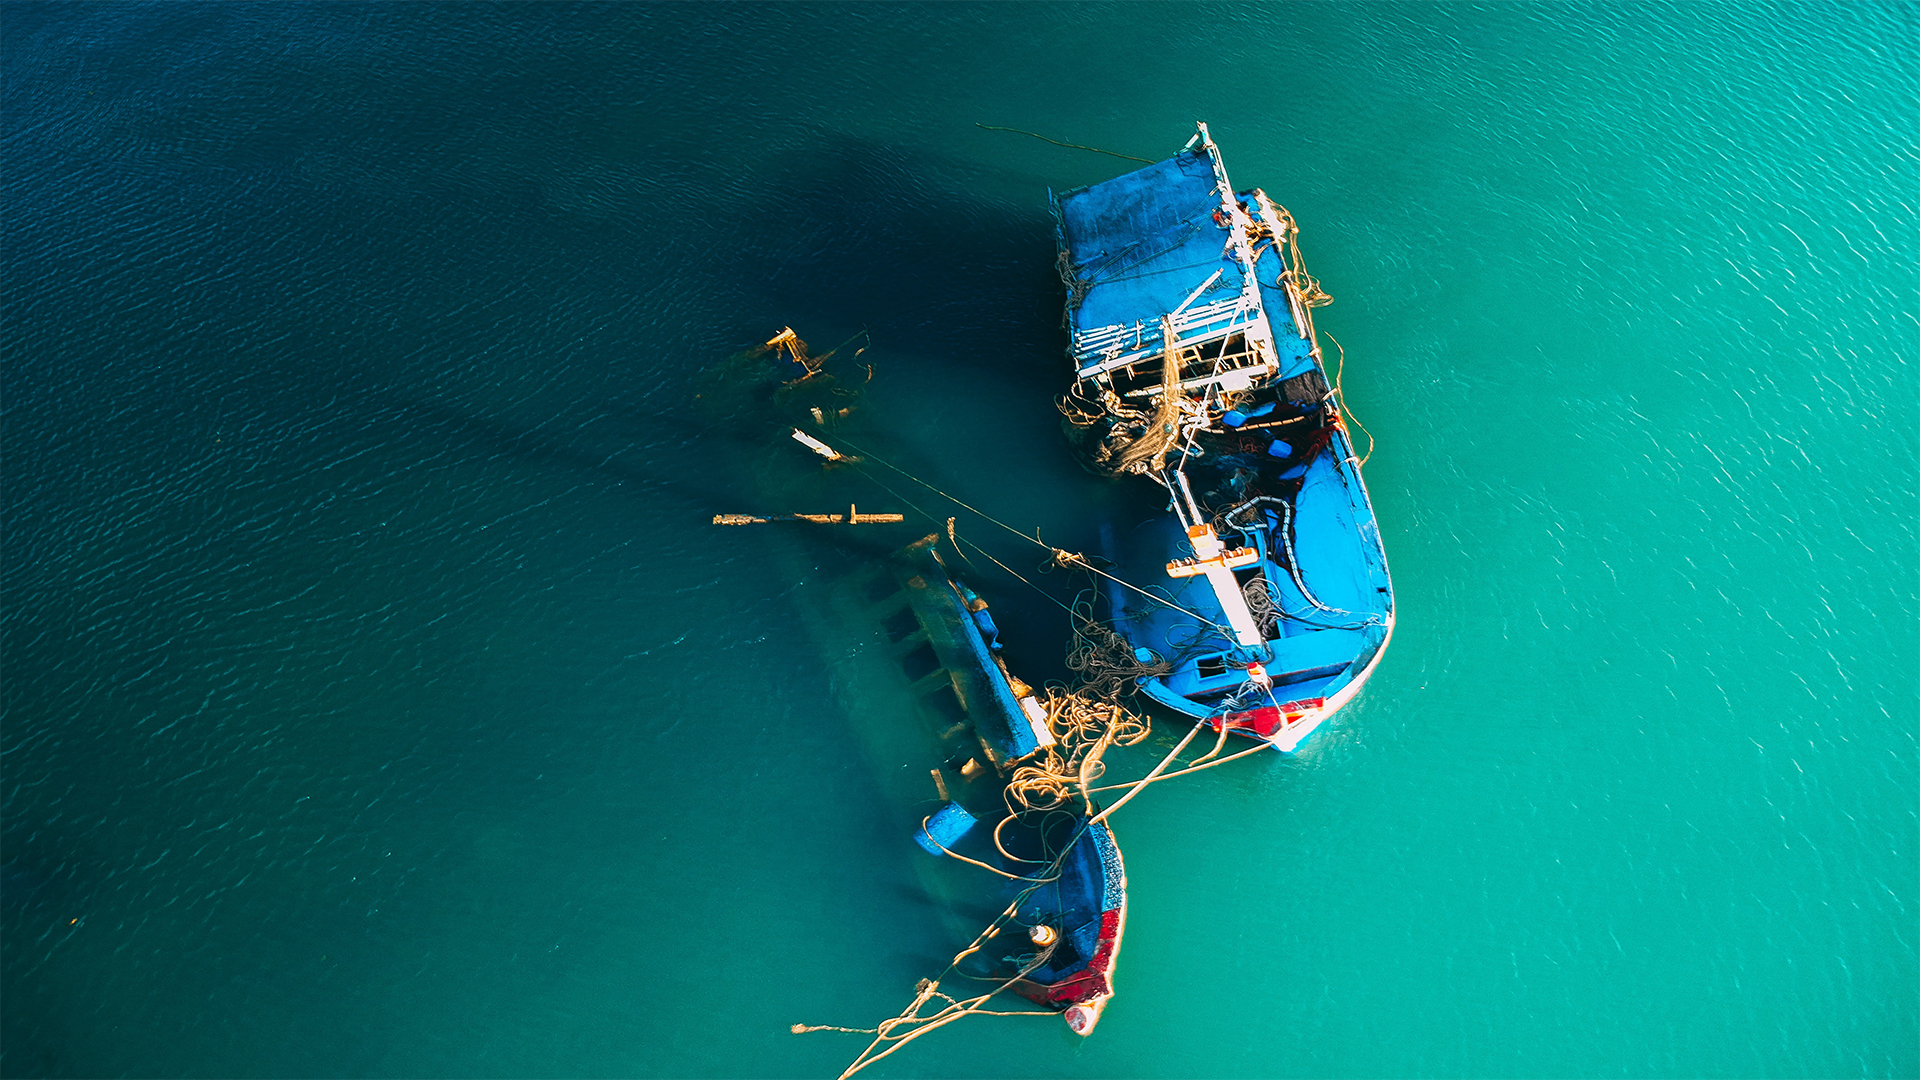 Tackle Marine Accident & Incident Investigation & Reporting With Confidence